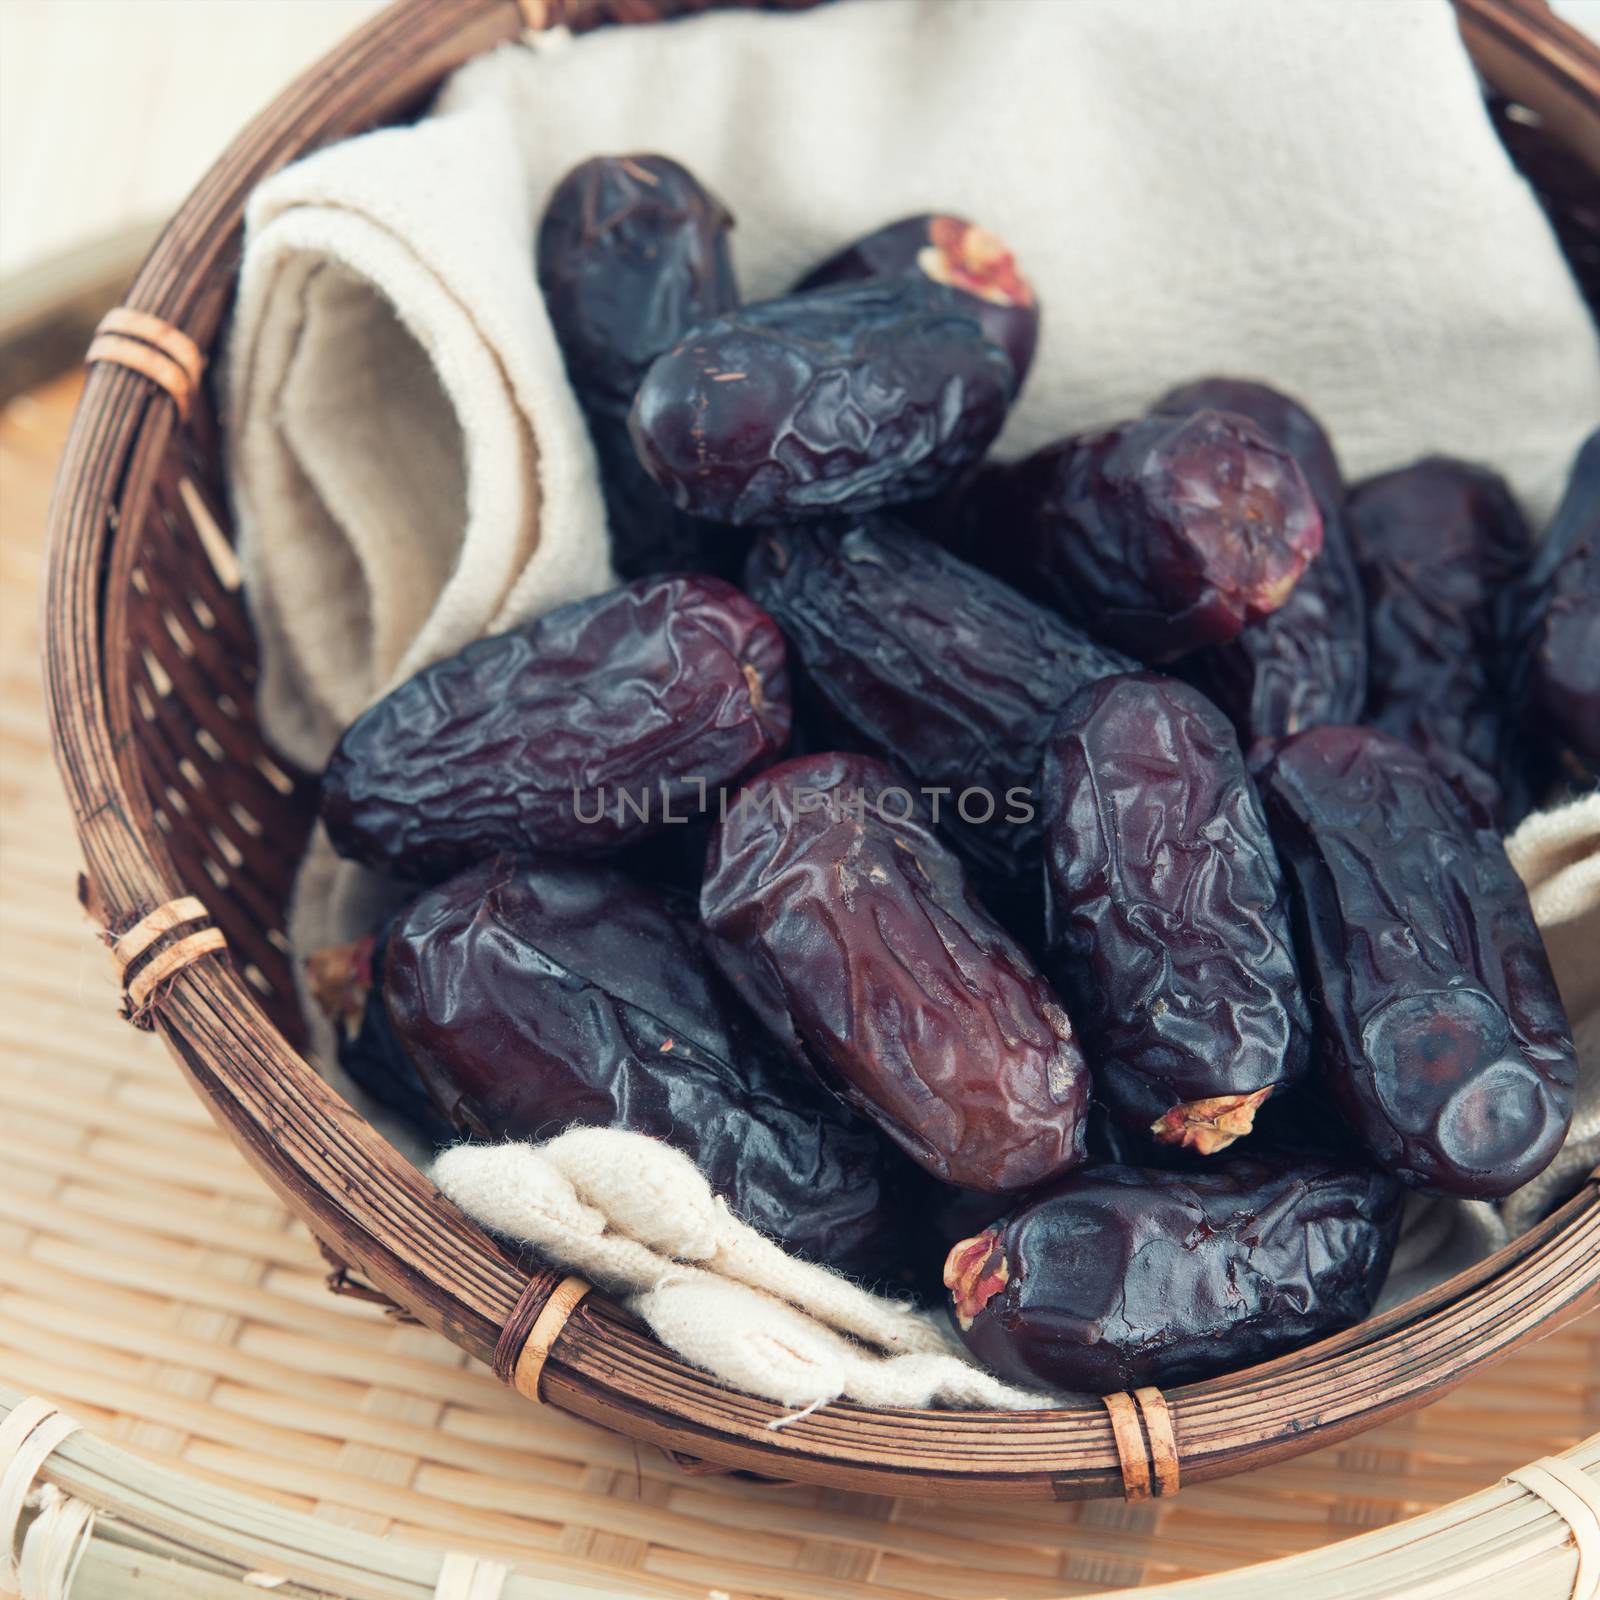 Dates fruit or kurma. Pile of fresh dried date fruits in a basket.